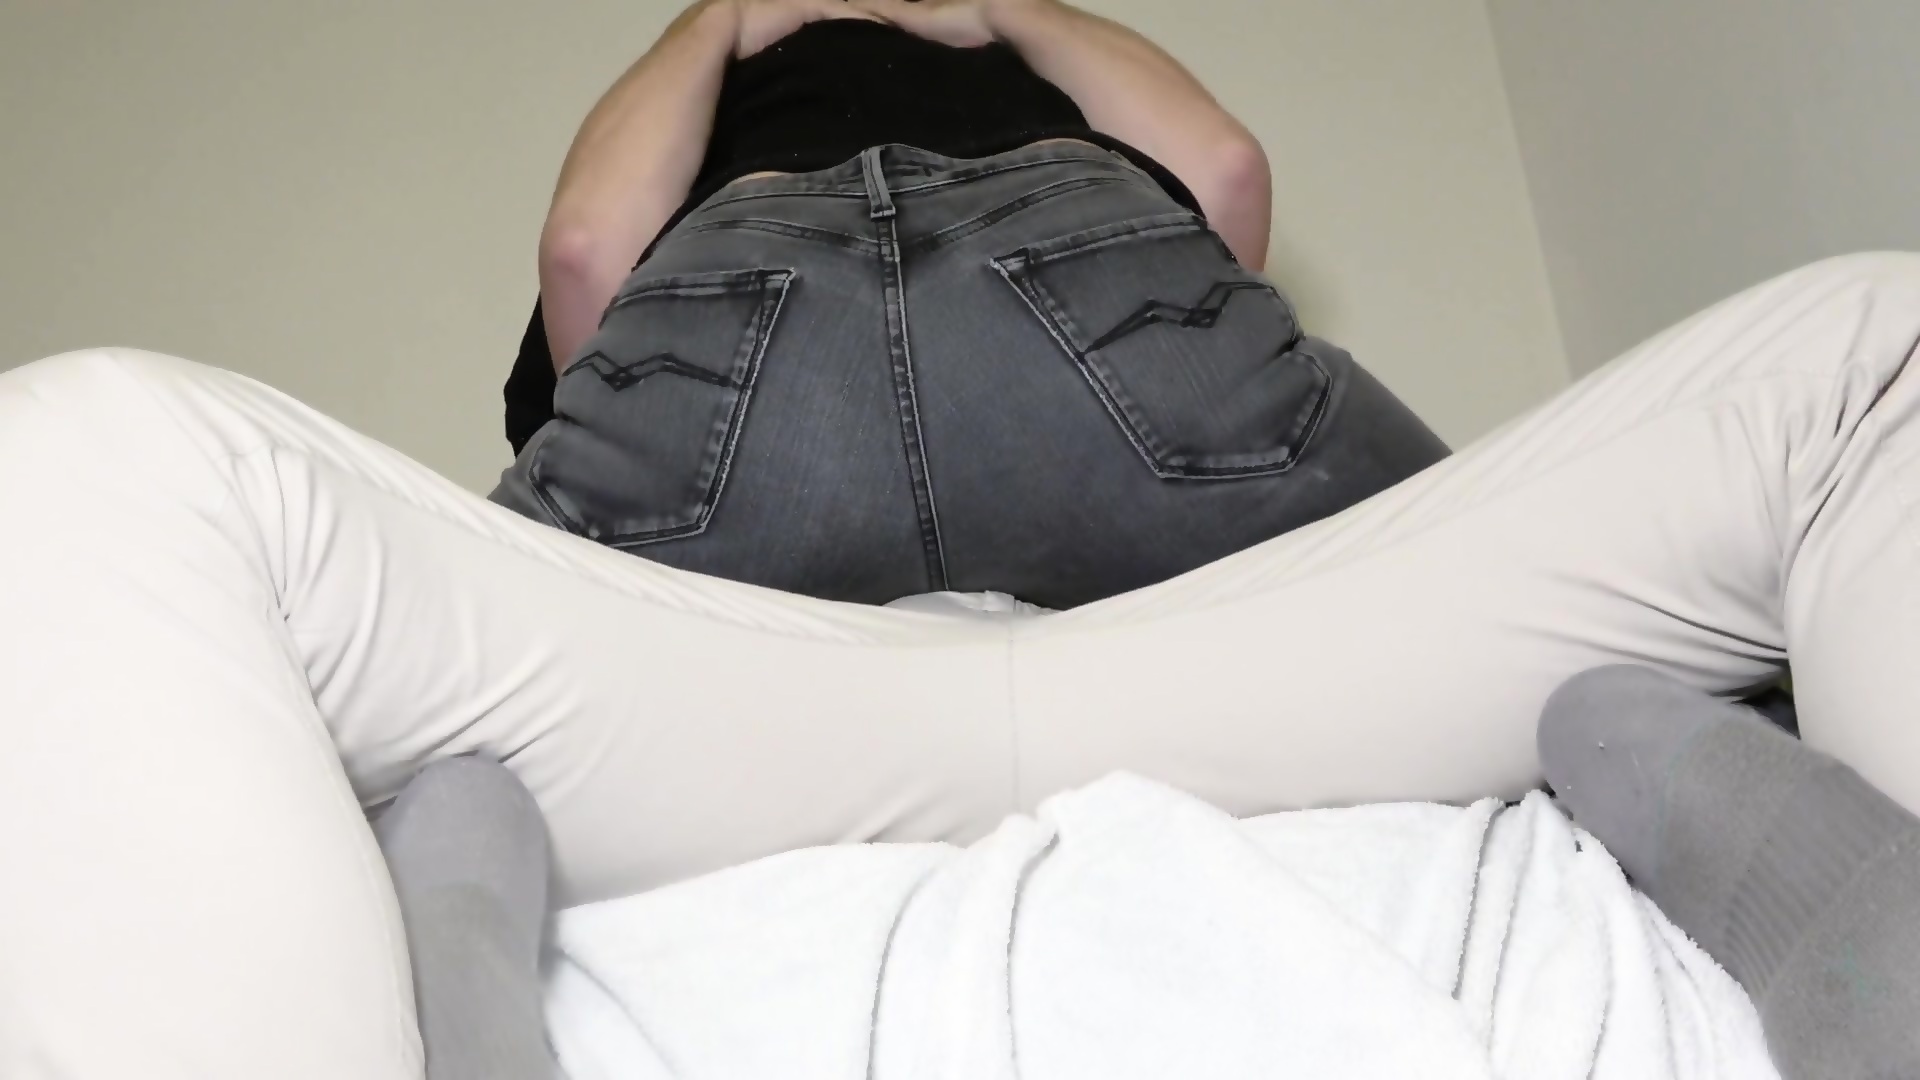 Pee On Me - This Slut Pee On Me In Her Jeans Without Warning - EPORNER